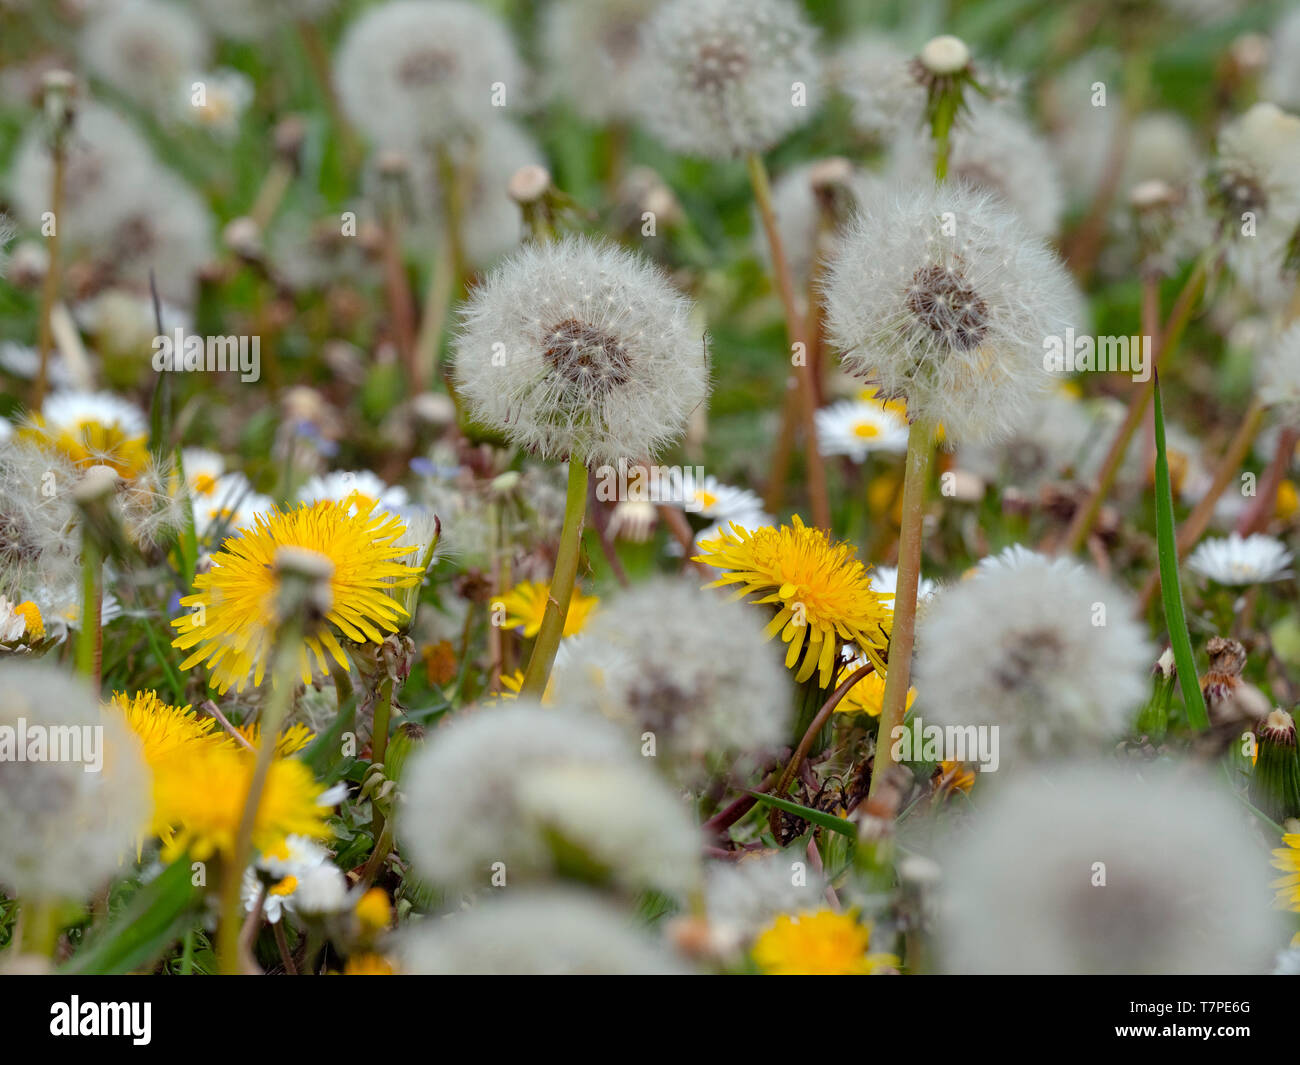 Dandelion Taxaxacum officinale seed heads and flowers Stock Photo